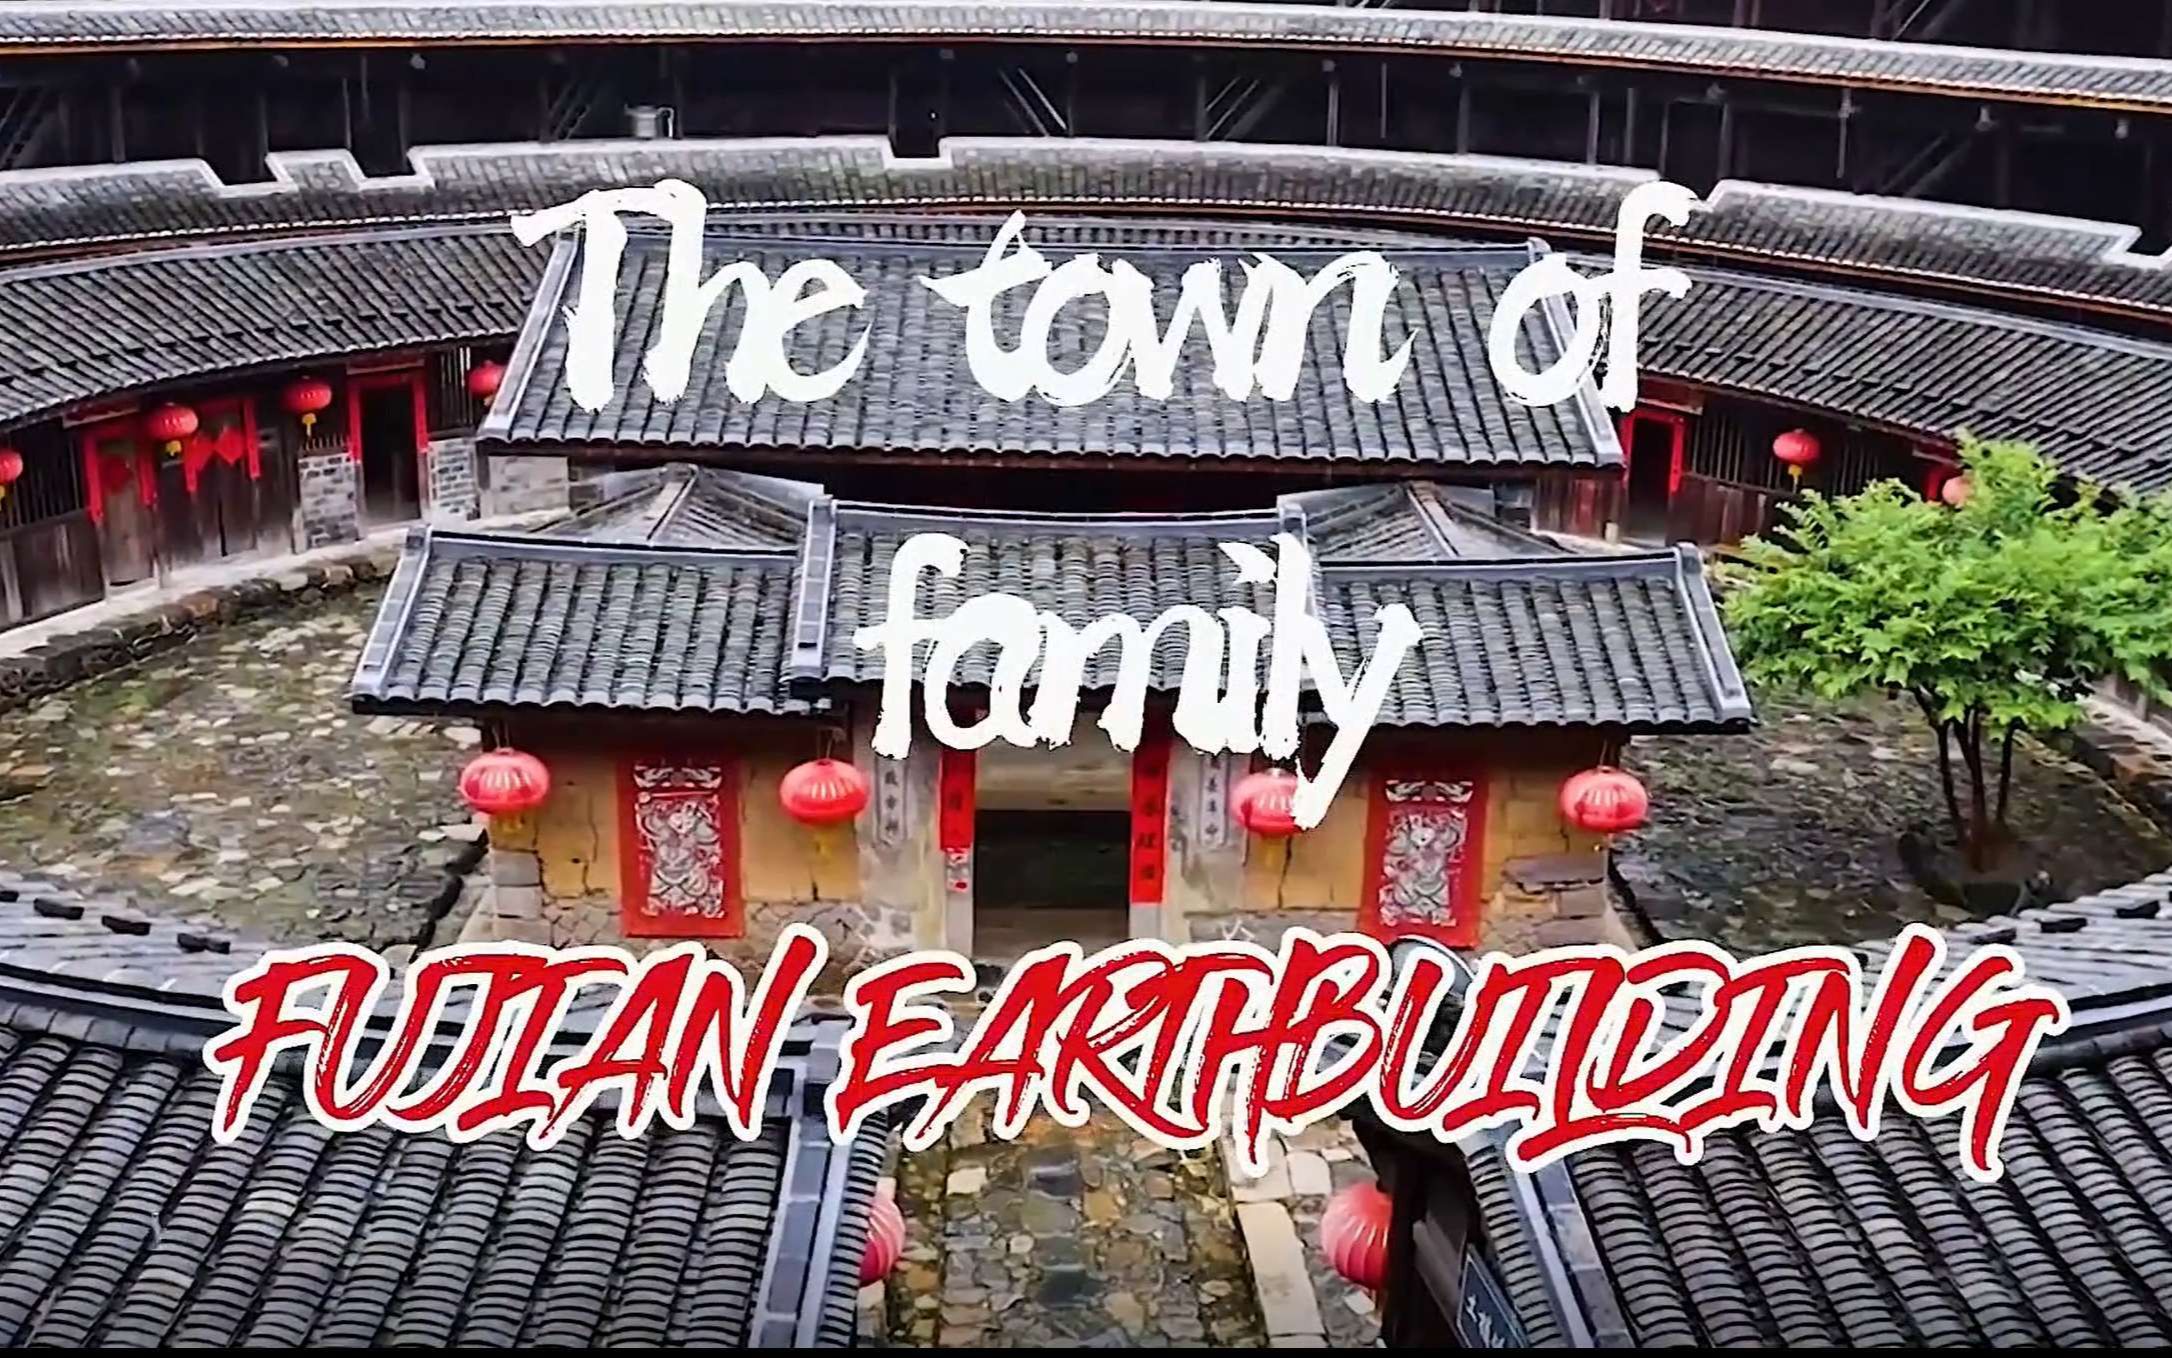 The Town of Family: Fujian Earth *uilding